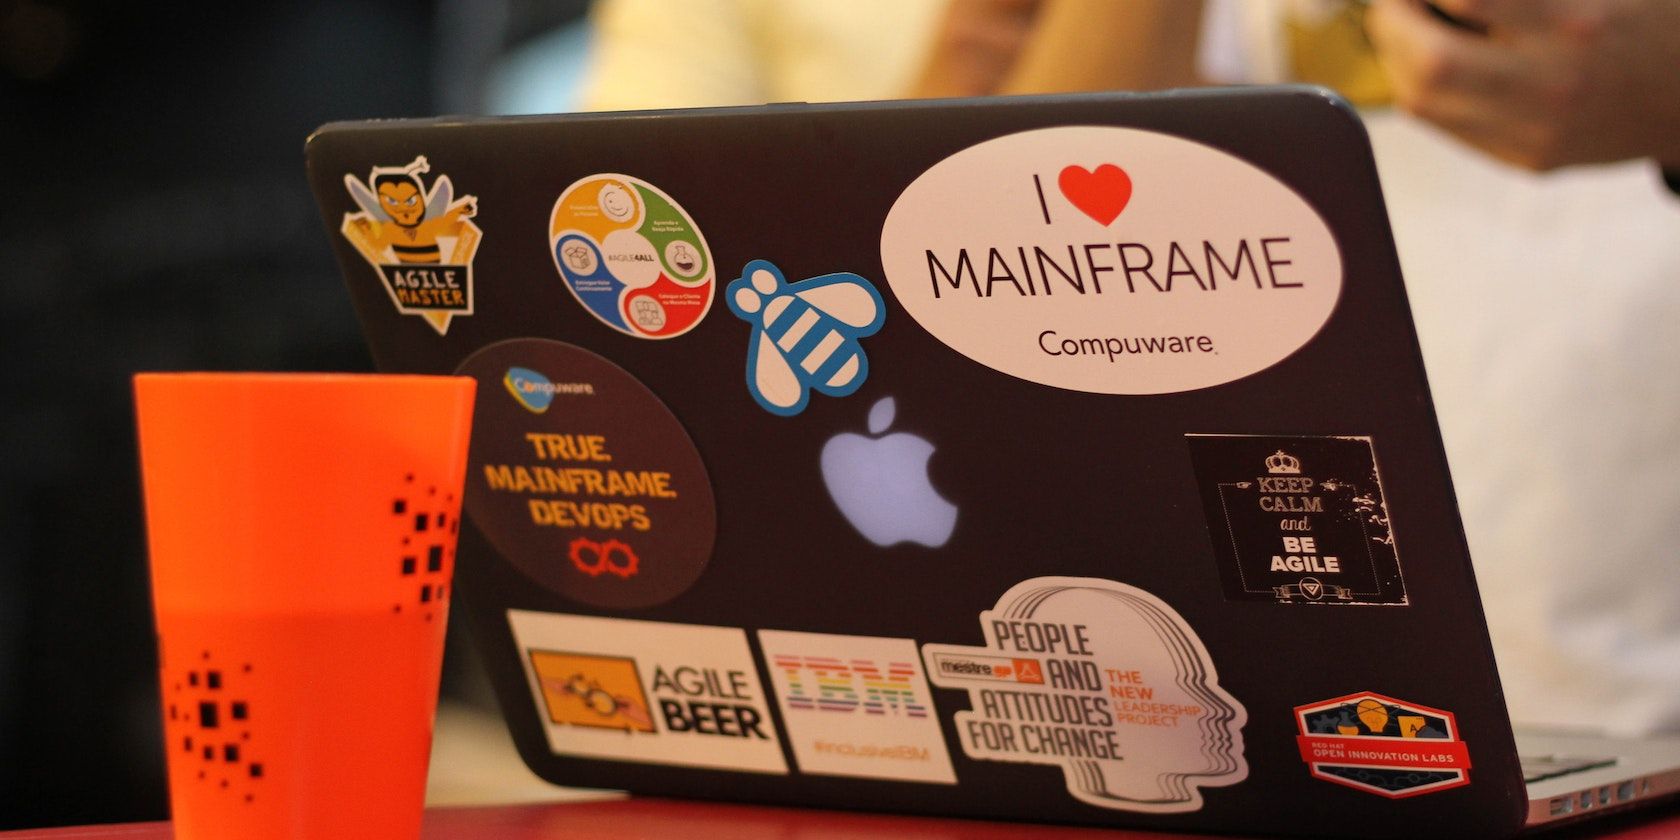 An Image of a laptop covered with DevOps & Agile stickers project management approach